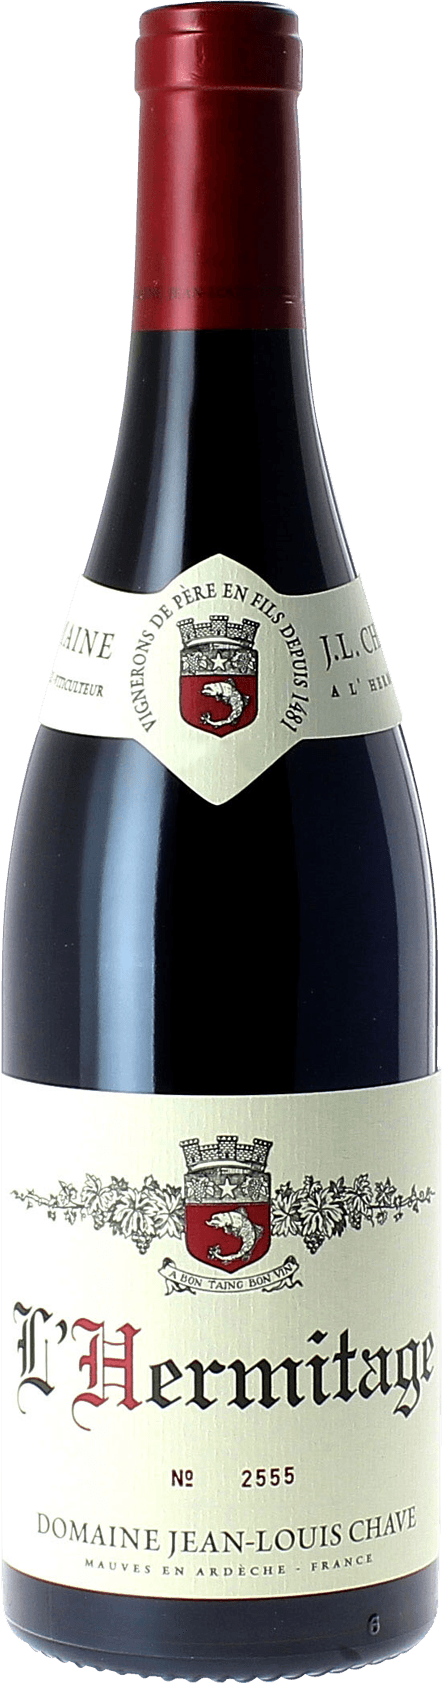 Hermitage rouge jean-louis chave 2018  Hermitage, Valle du Rhne Rouge